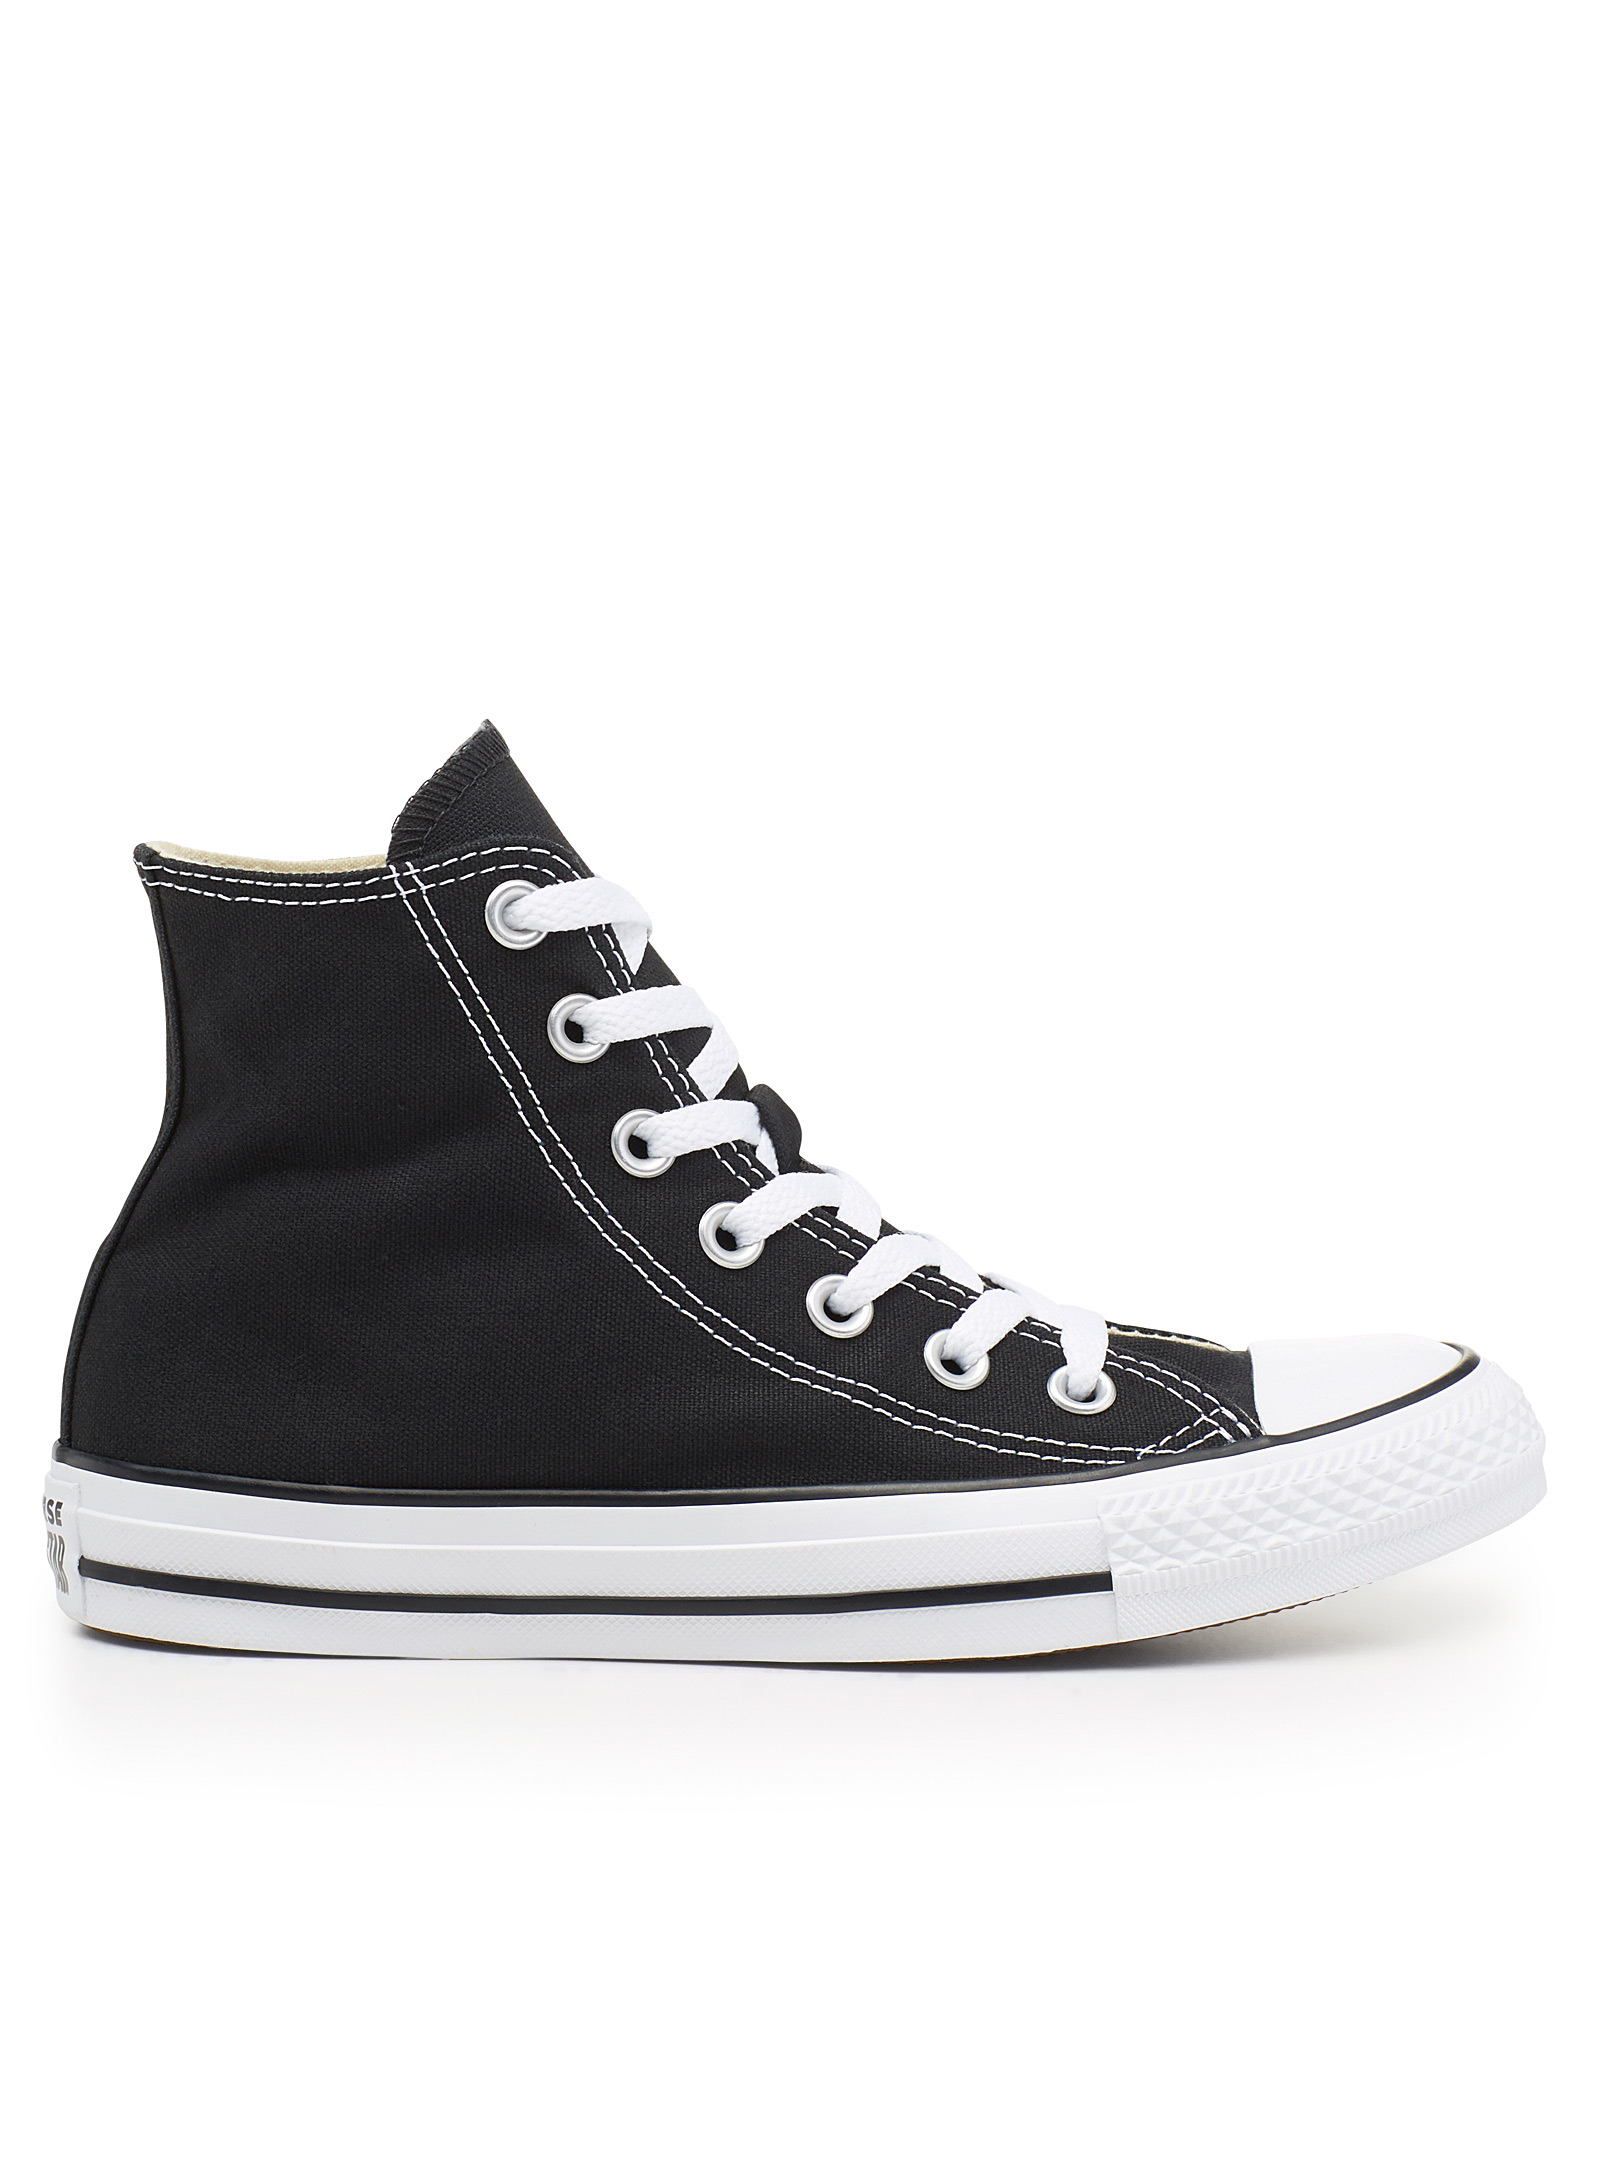 Shop Converse Chuck Taylor All Star High Top Sneakers Women In Black